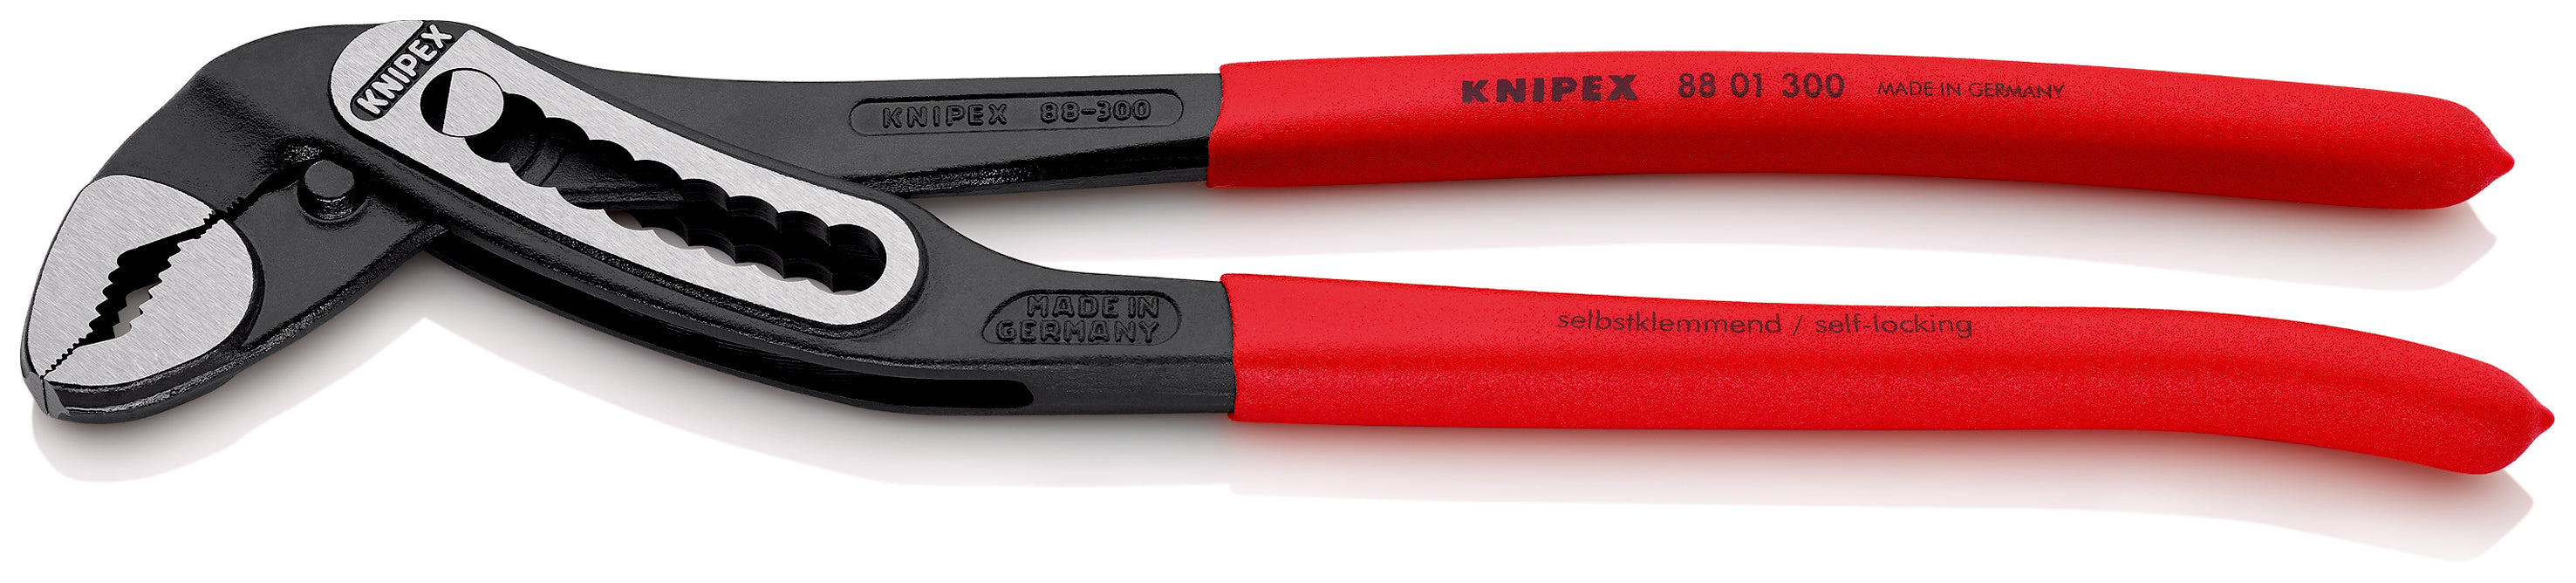 KNIPEX KNIPEX 85 01 250 SB SmartGrip® Water Pump Pliers with automatic  adjustment with non-slip plastic coating grey atramentize